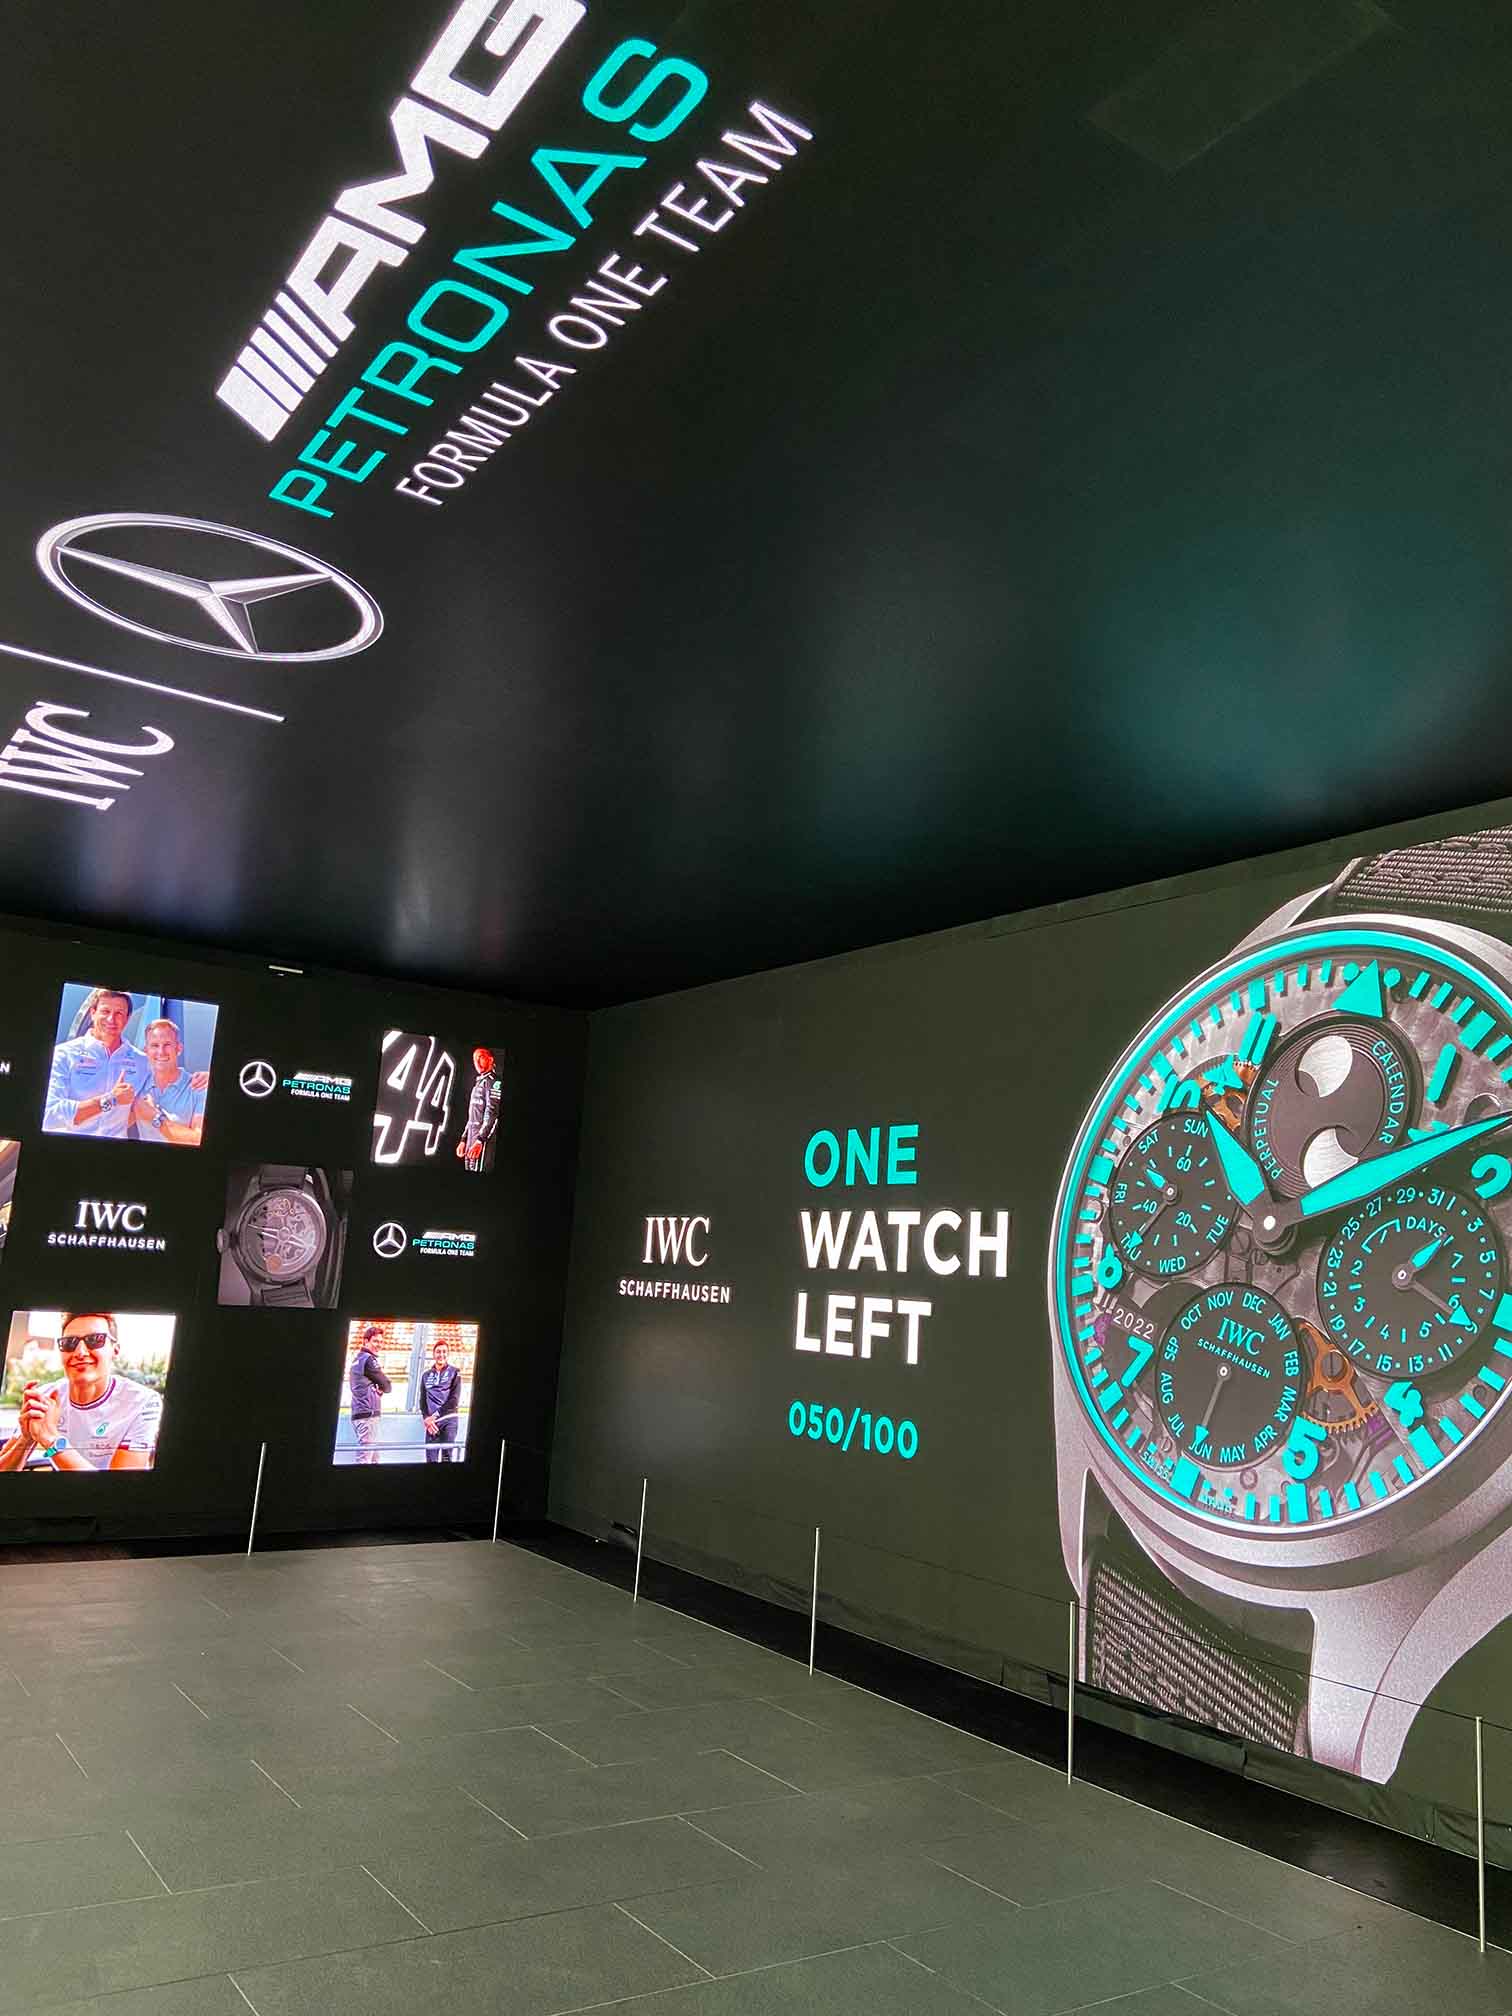 Displays showcasing the IWC and Mercedes Formula One partnership